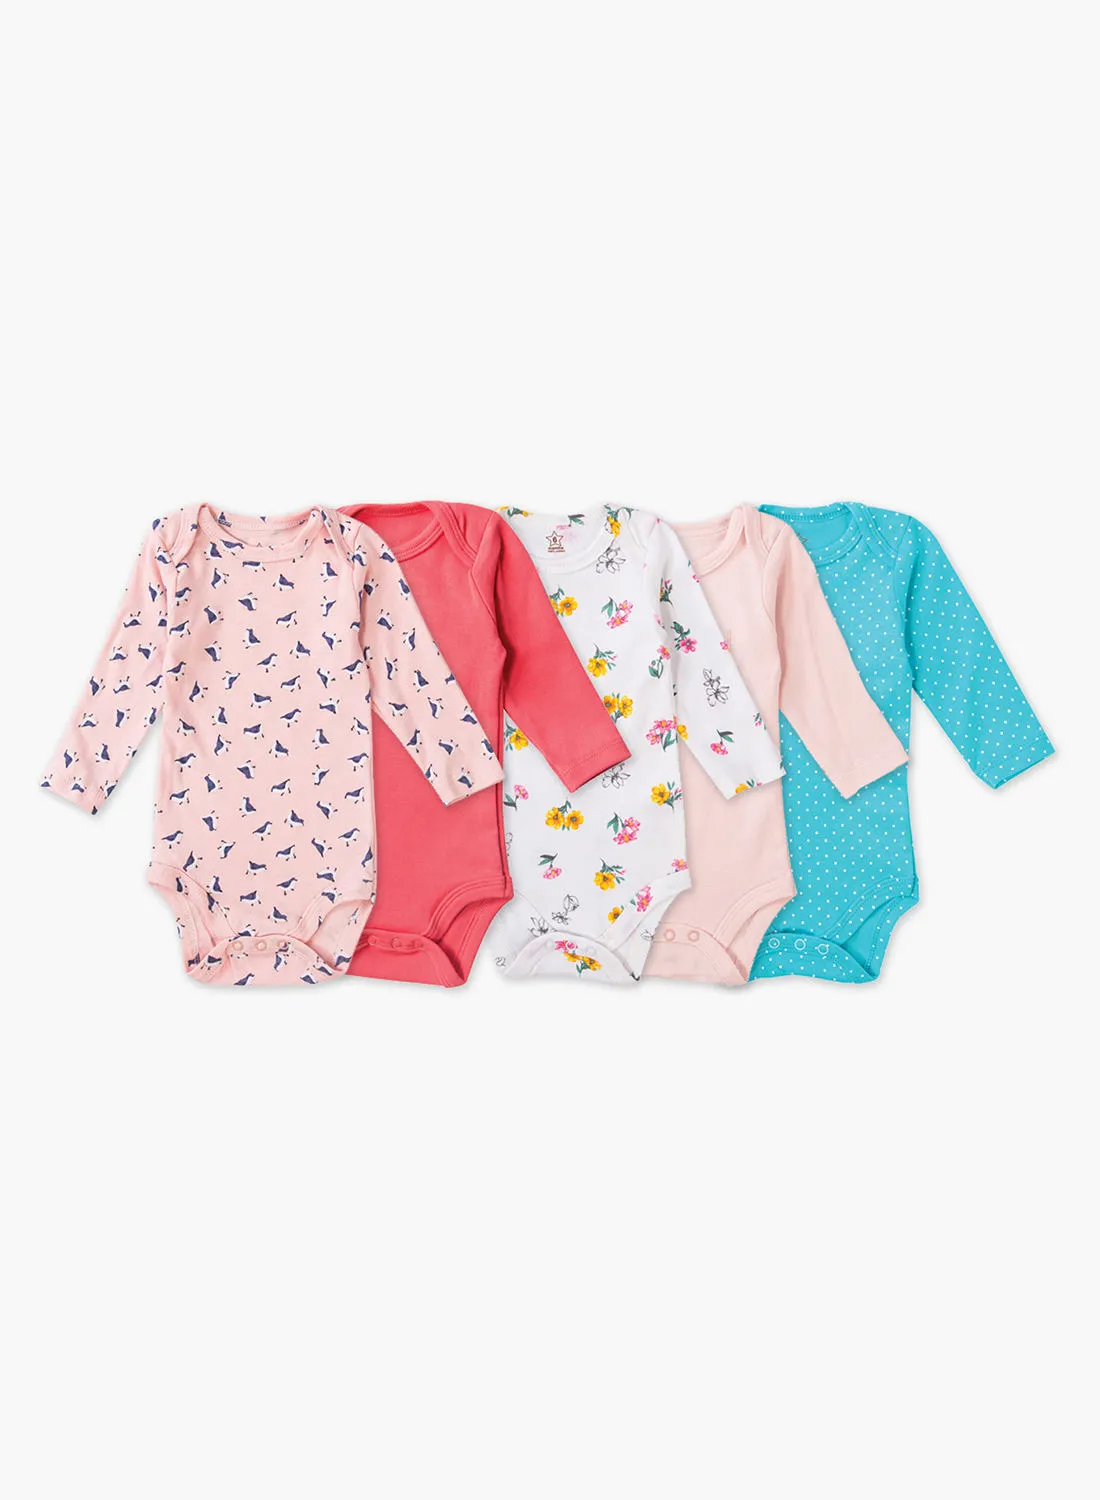 POP MAGIC Baby Unisex 5-Piece Round Neck Long Sleeve Printed Rompers Pink/Peach/White